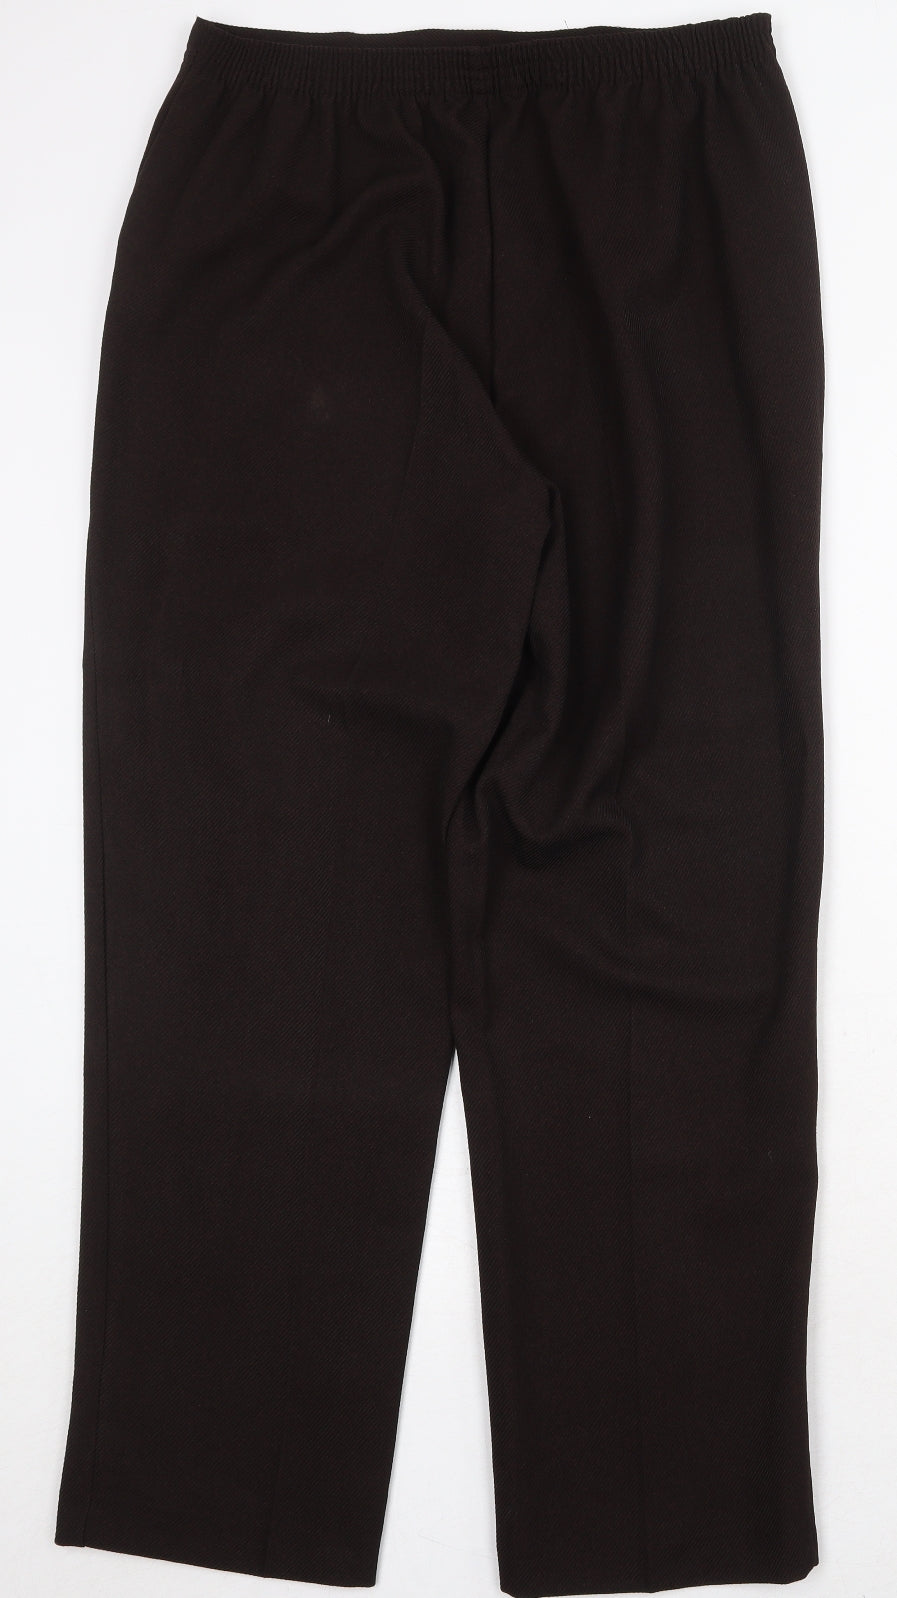 Bonmarché Womens Brown Polyester Trousers Size 14 Regular